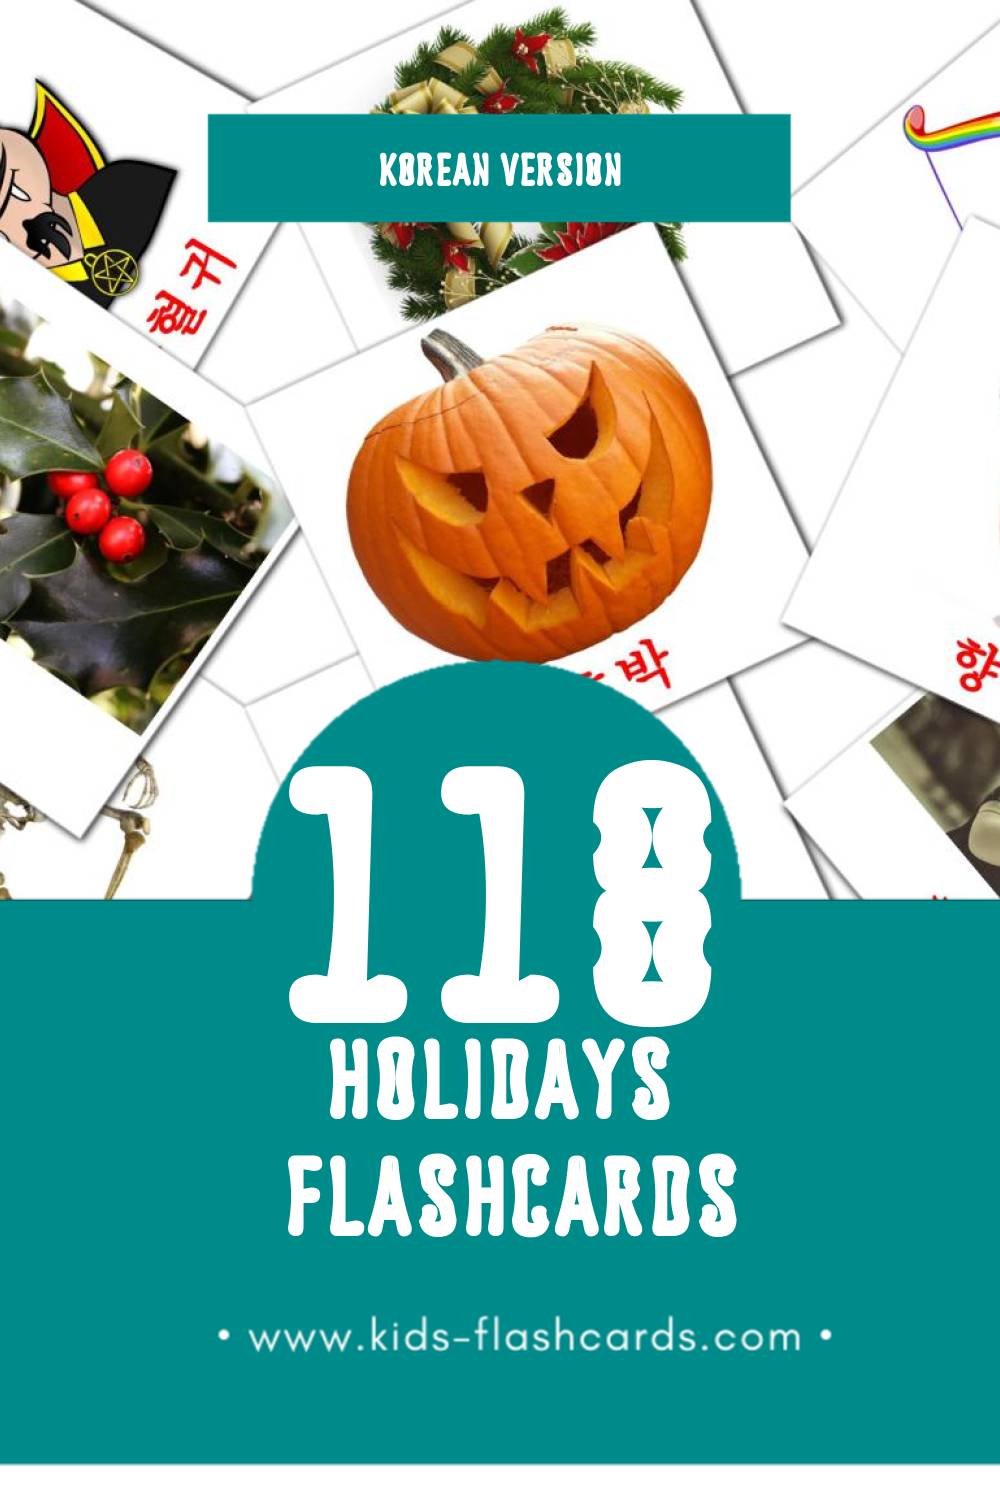 Visual 휴가 Flashcards for Toddlers (16 cards in Korean)